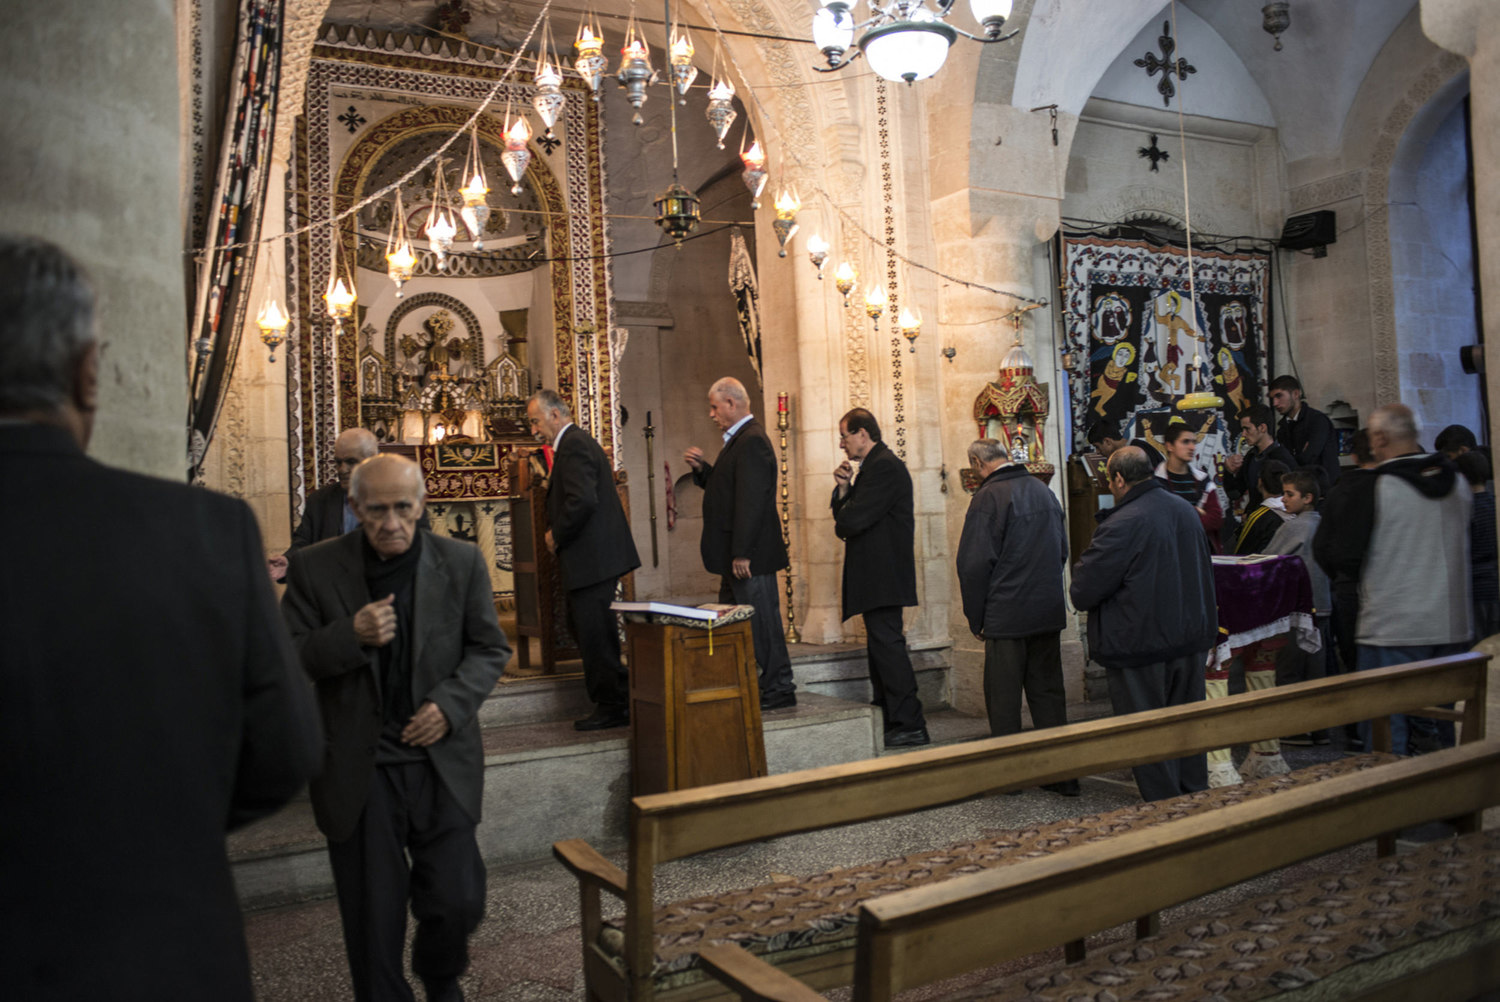  A church service at Mor Barsaumo church on October 31st, 2014.

The Mor Barsaumo church is over 1,500 years old and was renovated in 1943. It is located 21 Şen Caddessi in Midyat, Turkey. 